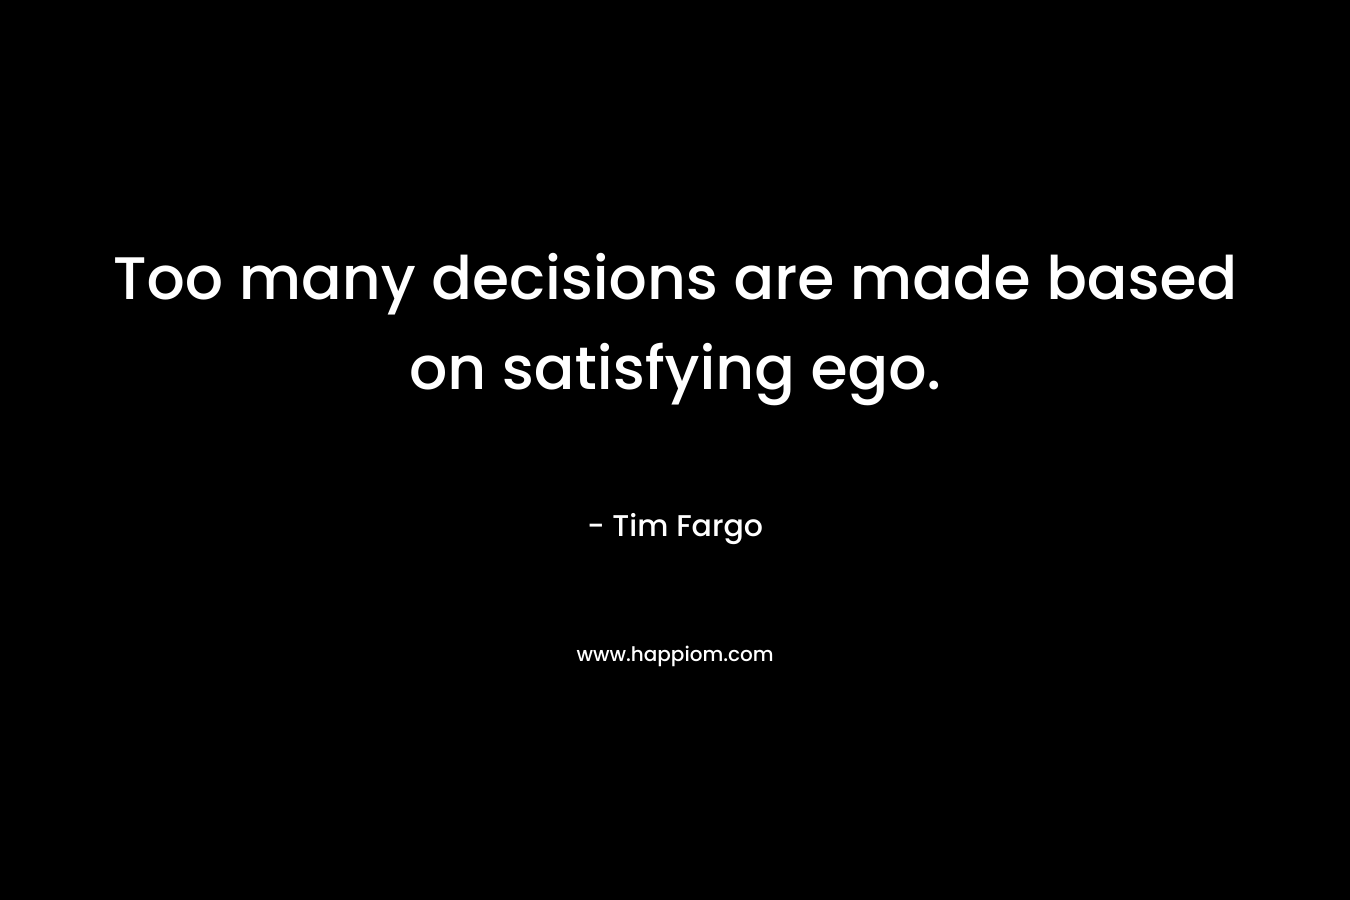 Too many decisions are made based on satisfying ego. – Tim Fargo